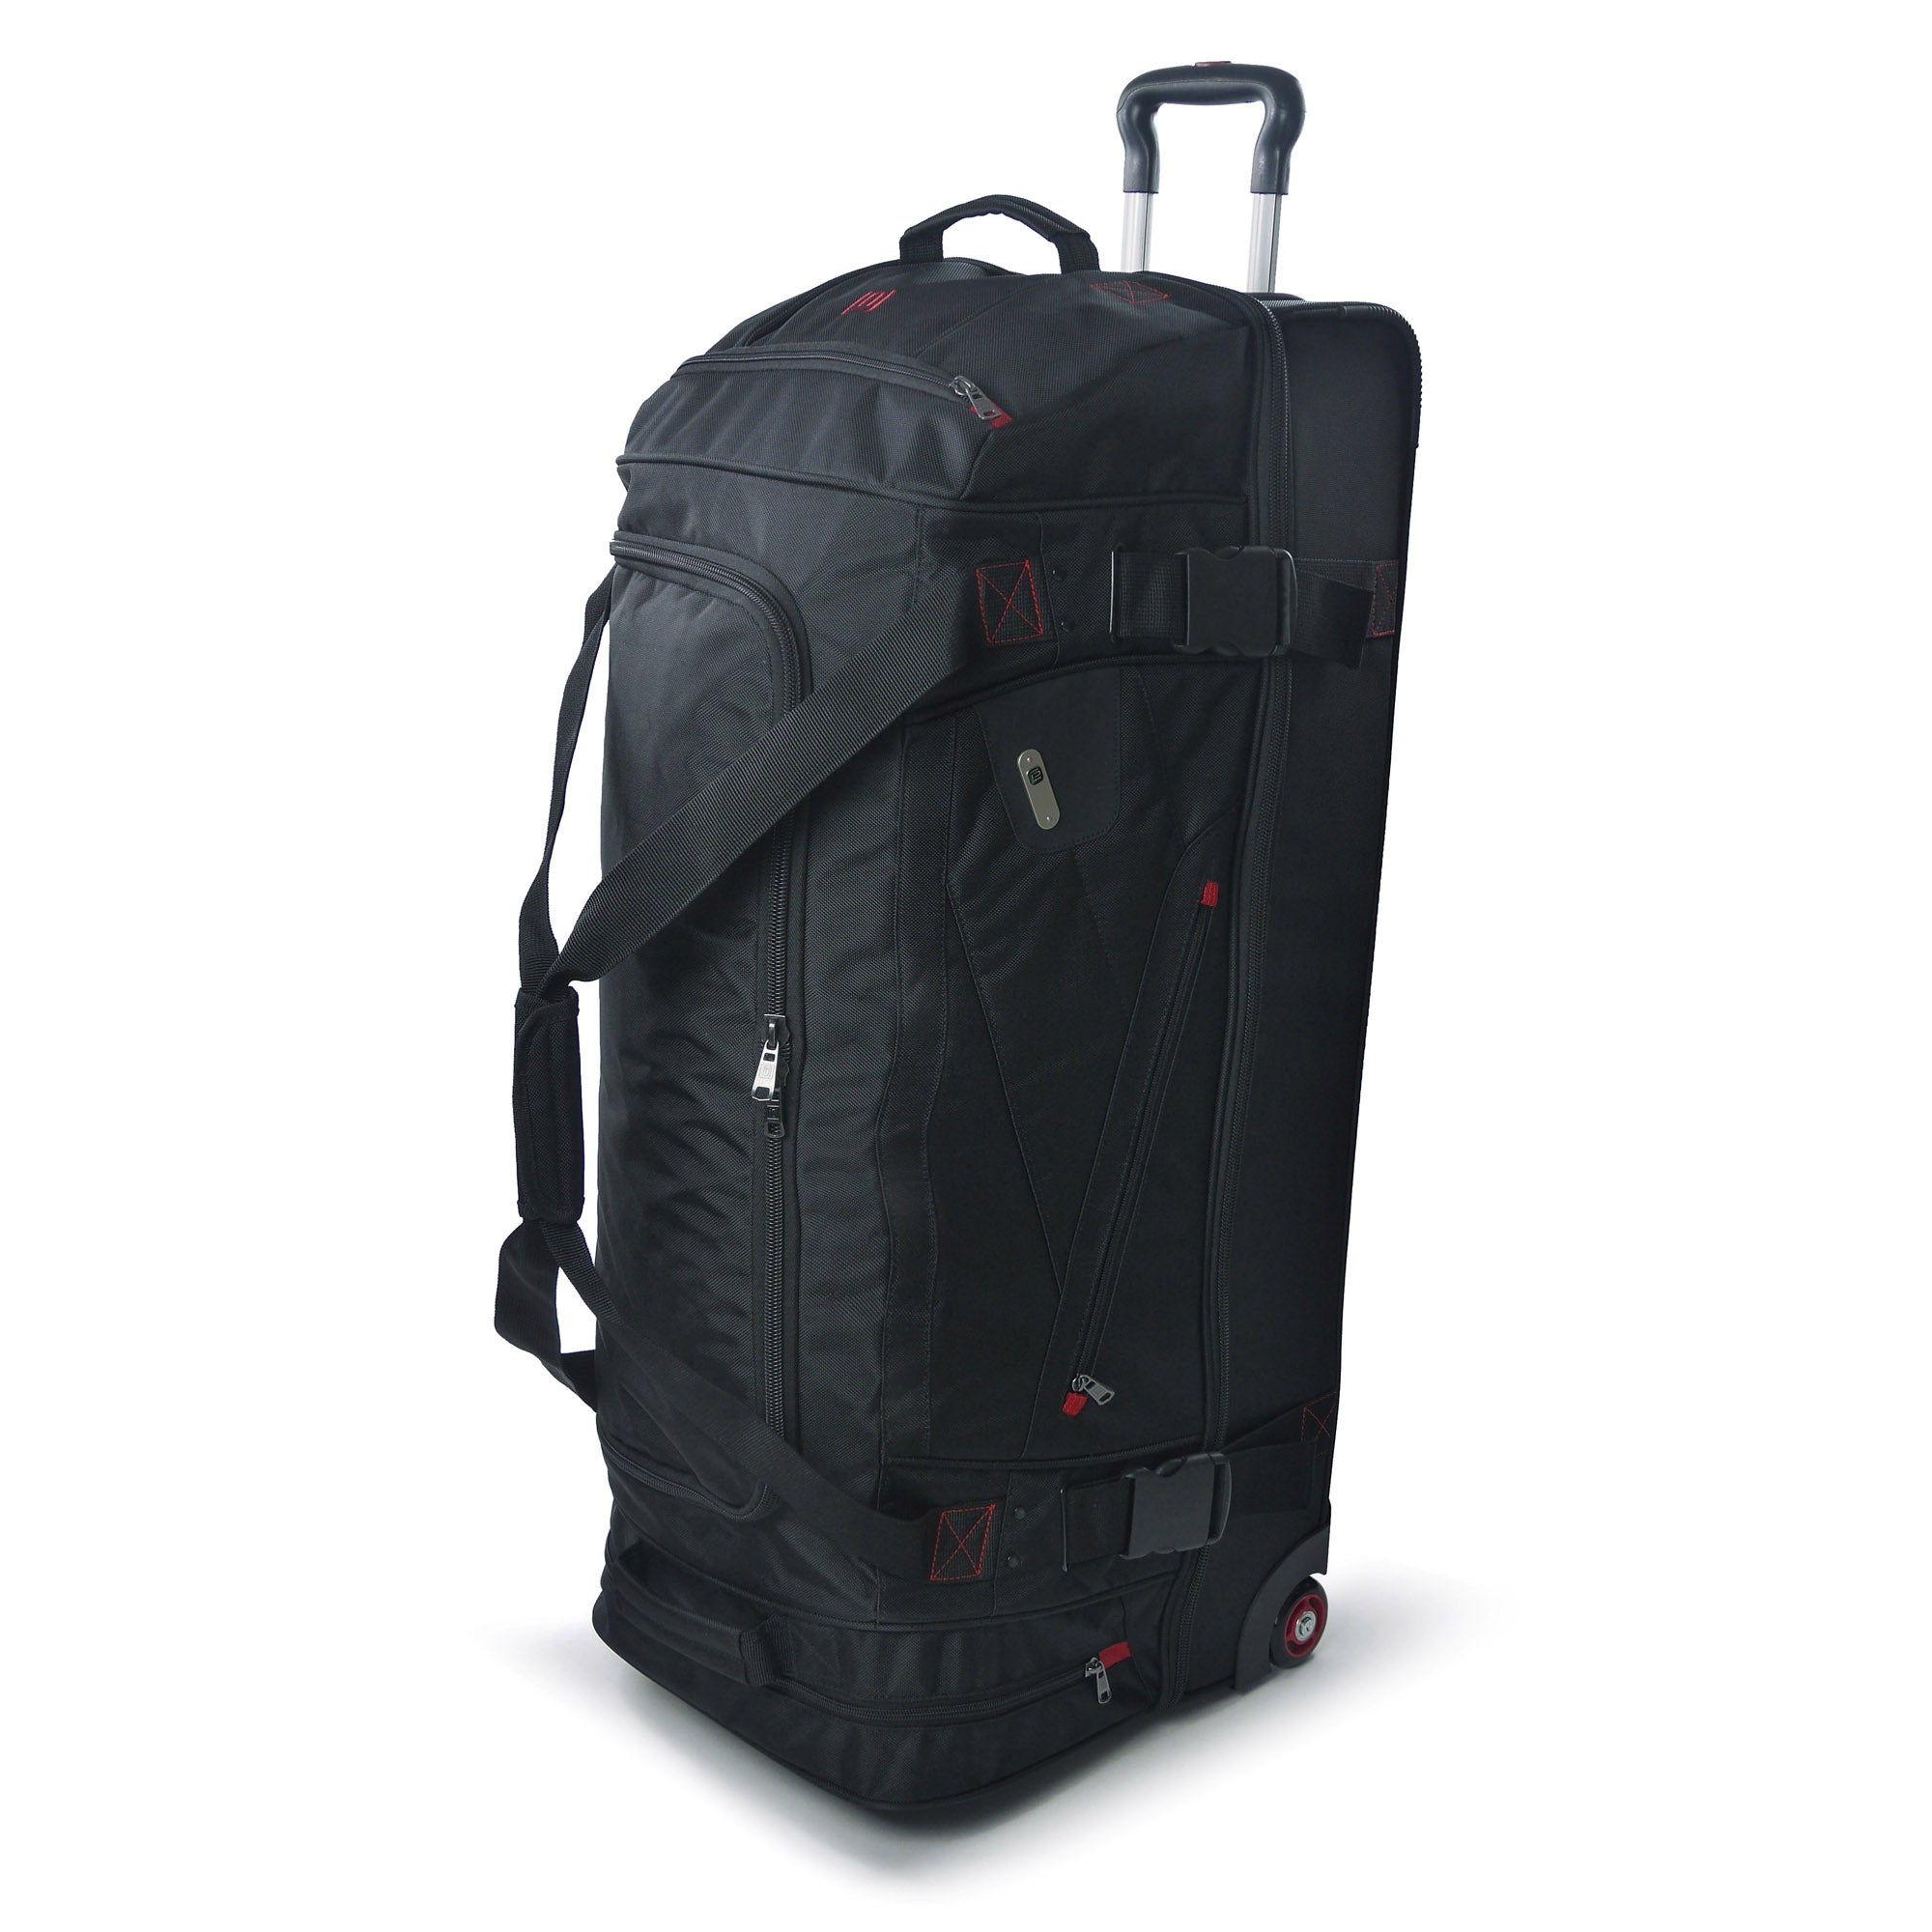 FUL Tour Manager 36" Rolling Duffel Bag